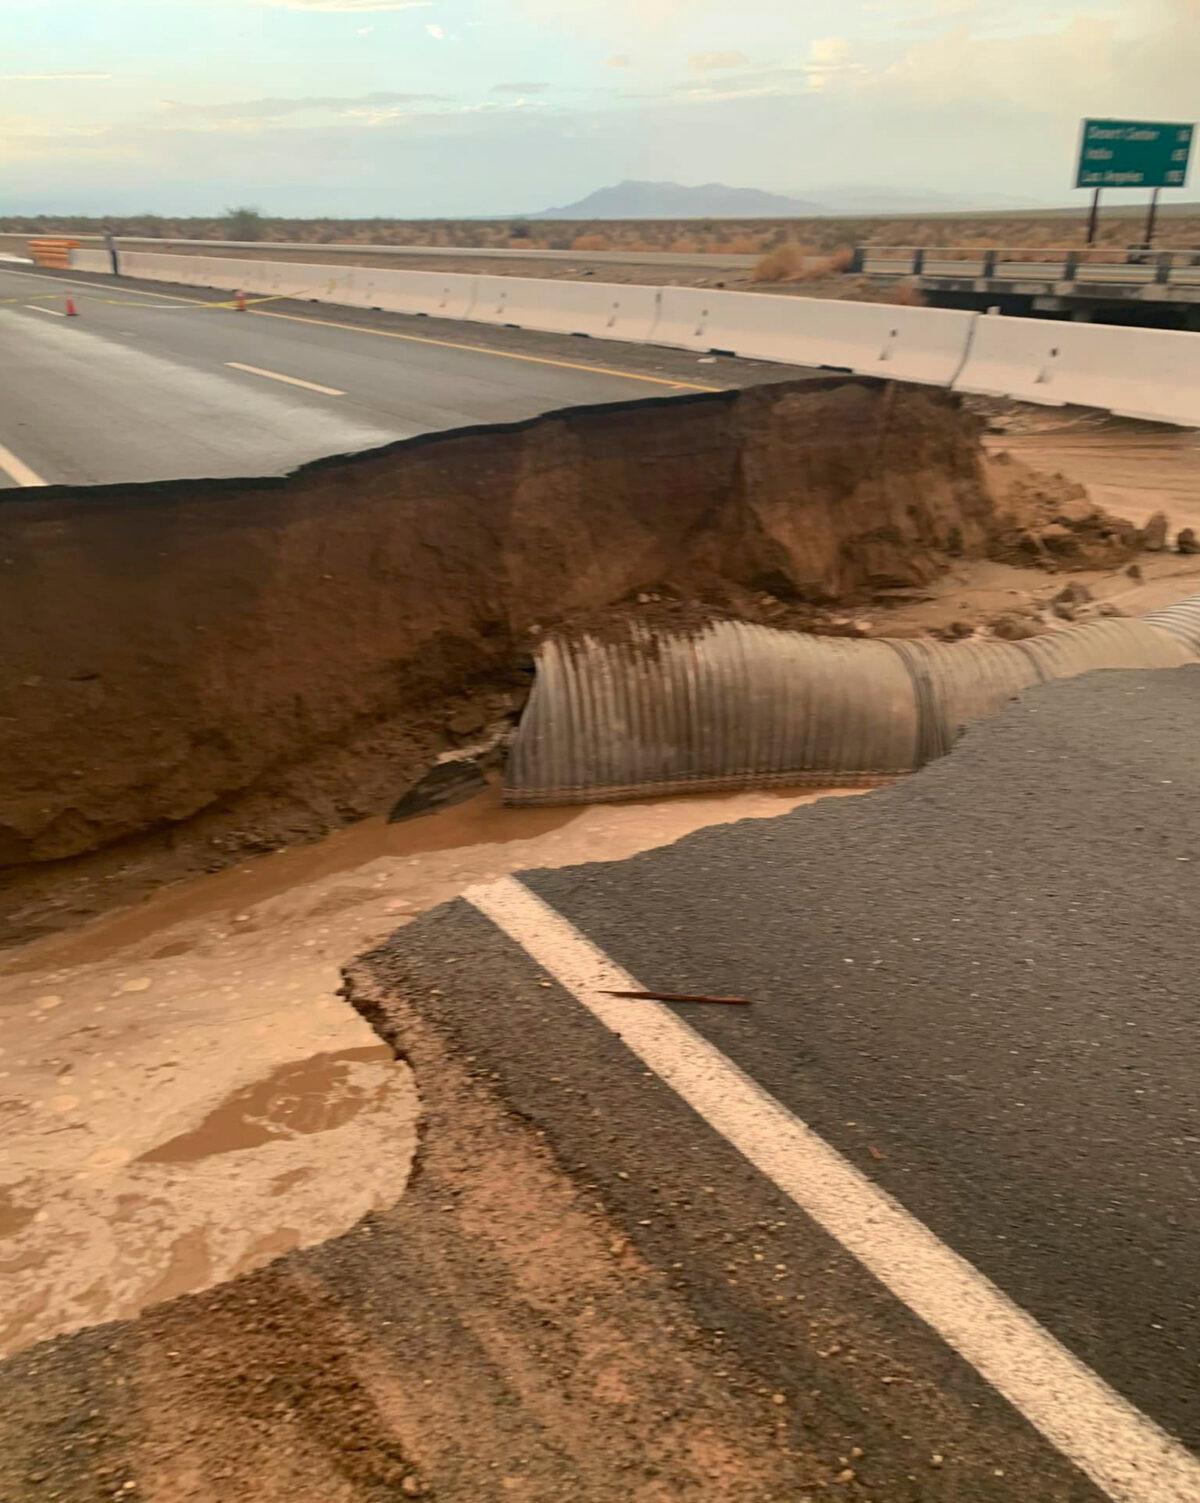  A washed out section of Interstate 10 near Desert Center, Calif., on Aug. 24, 2022. (Caltrans via AP)